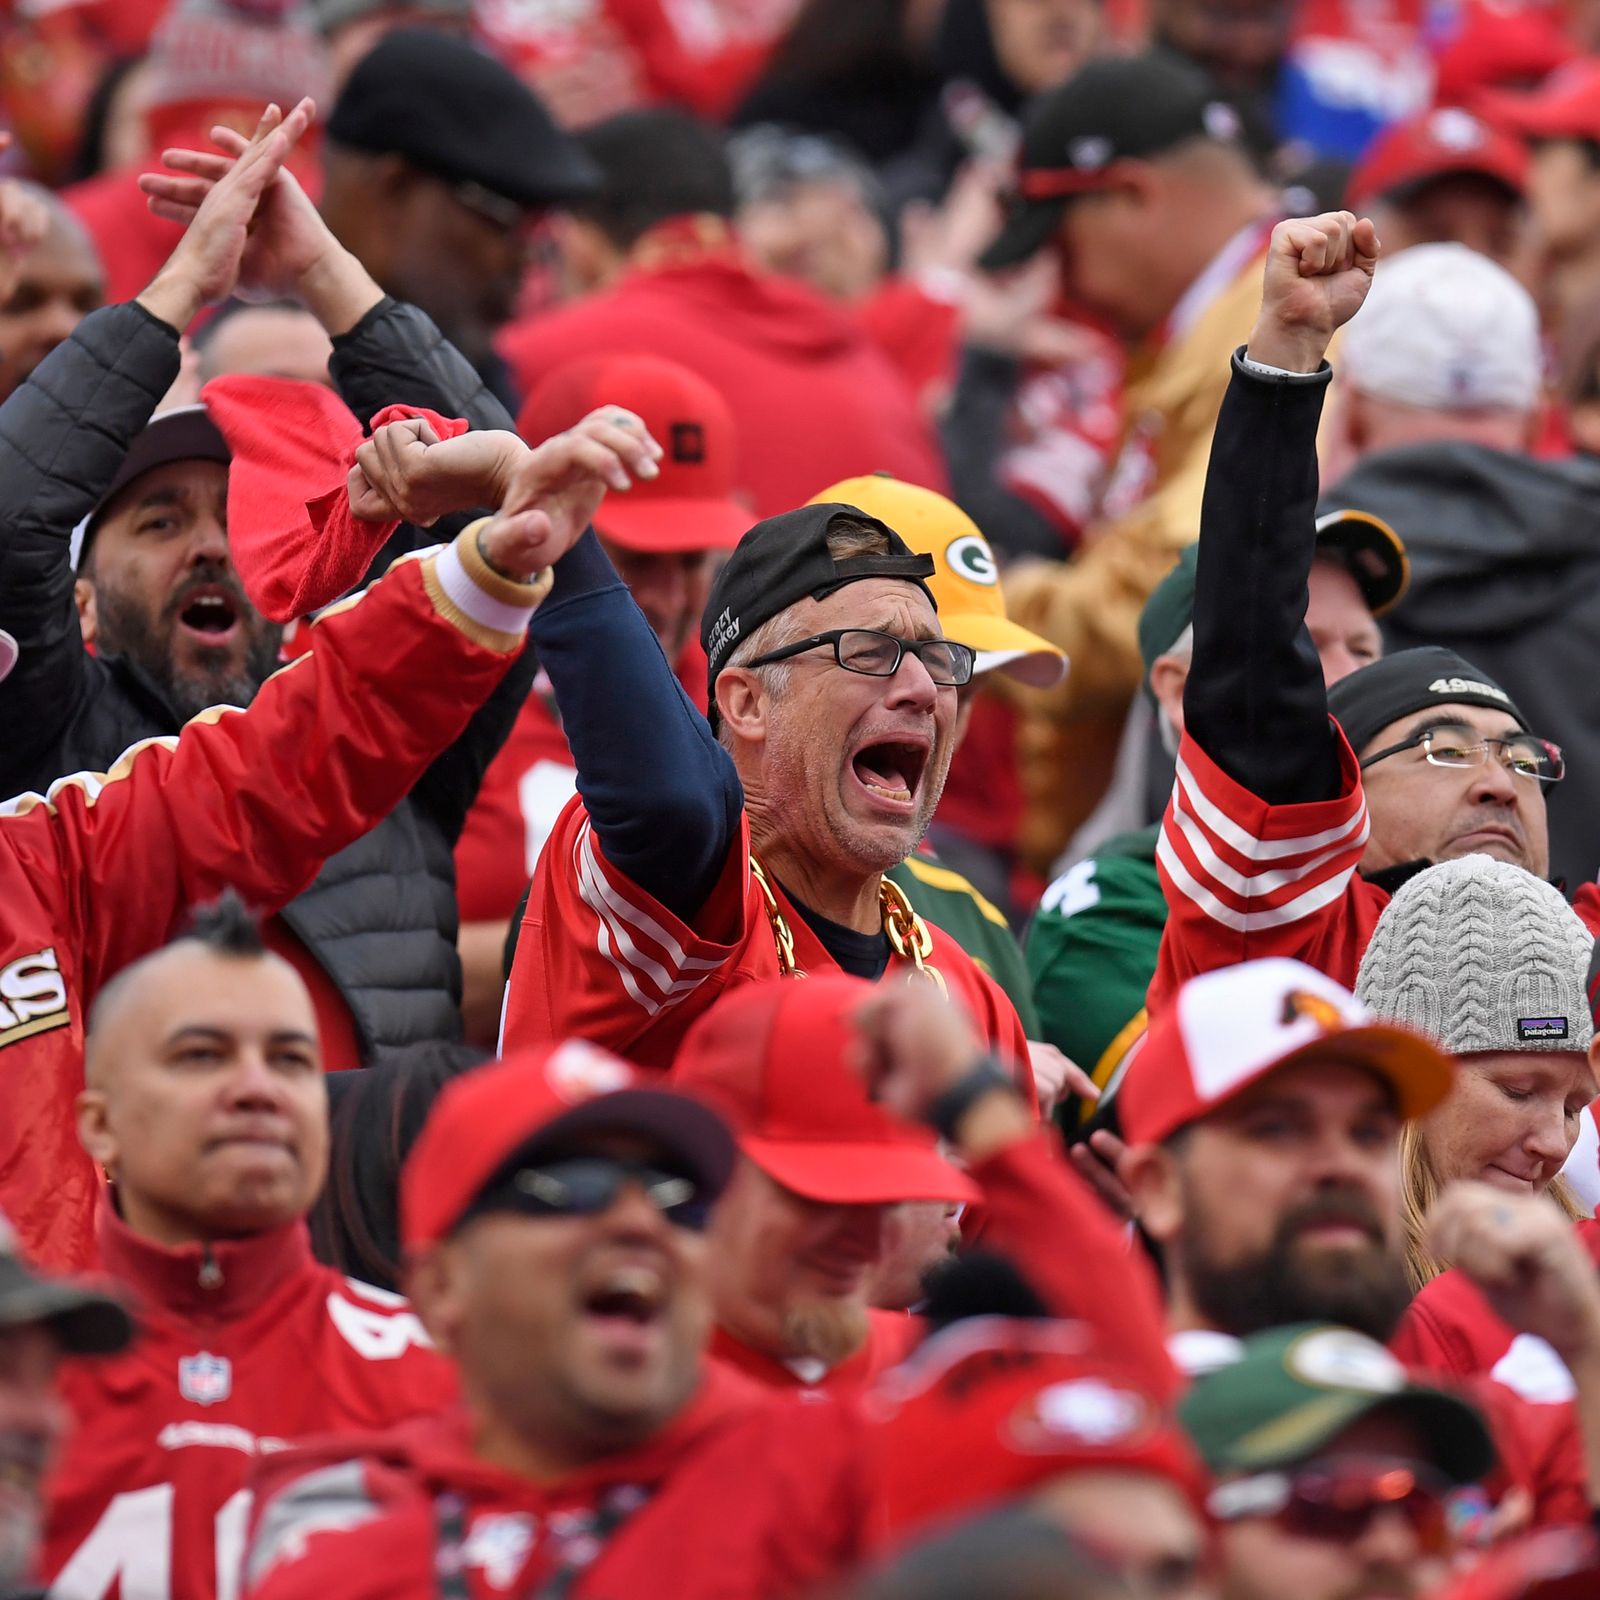 49ers vs. Packers is the most expensive ticket of the Niners' 2019 season